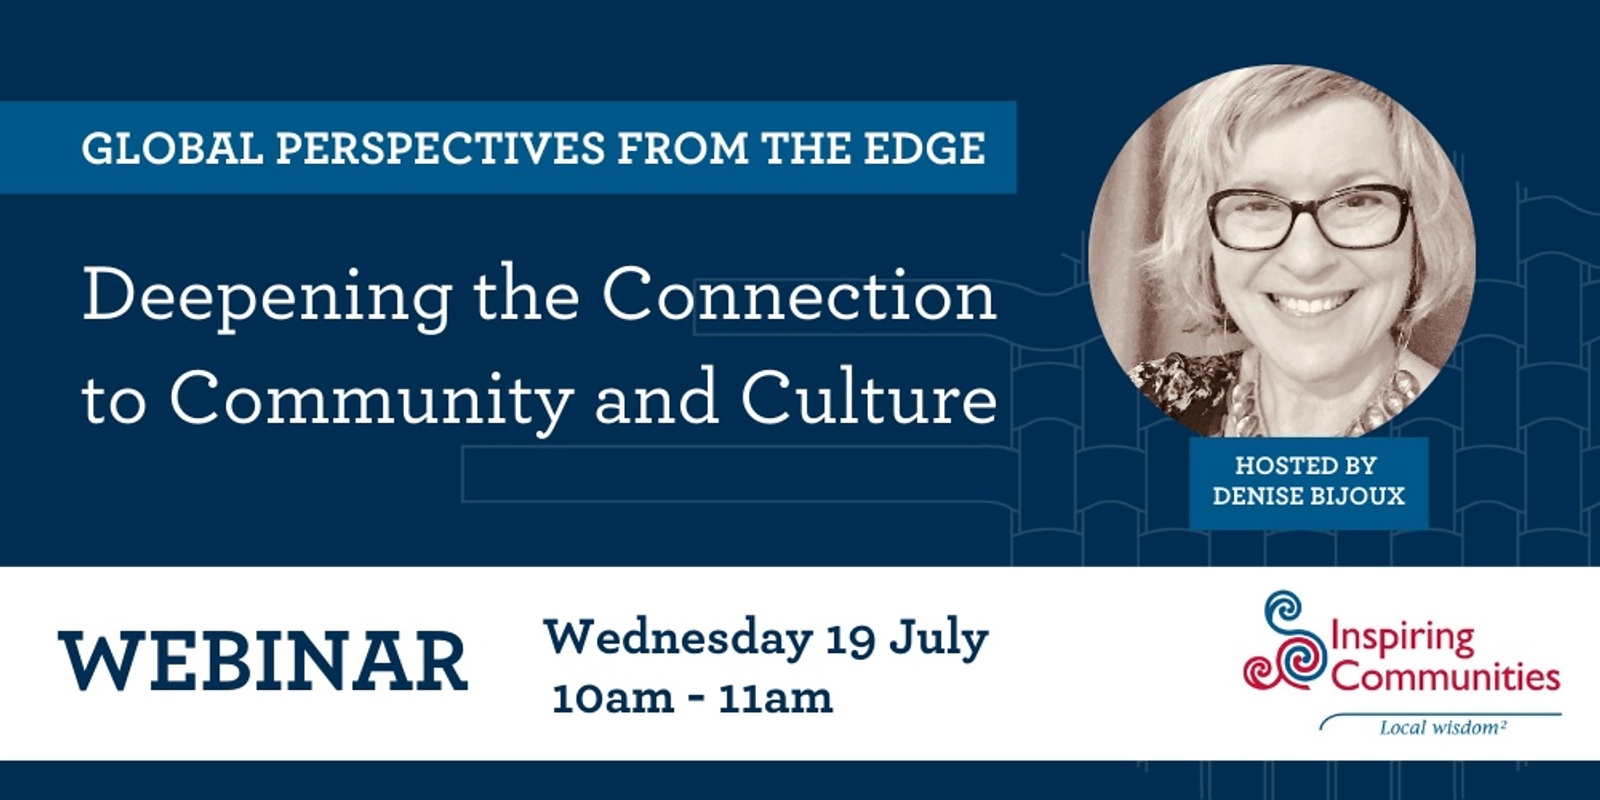 WEBINAR: Global Perspectives From the Edge – Deepening the Connection to Community and Culture